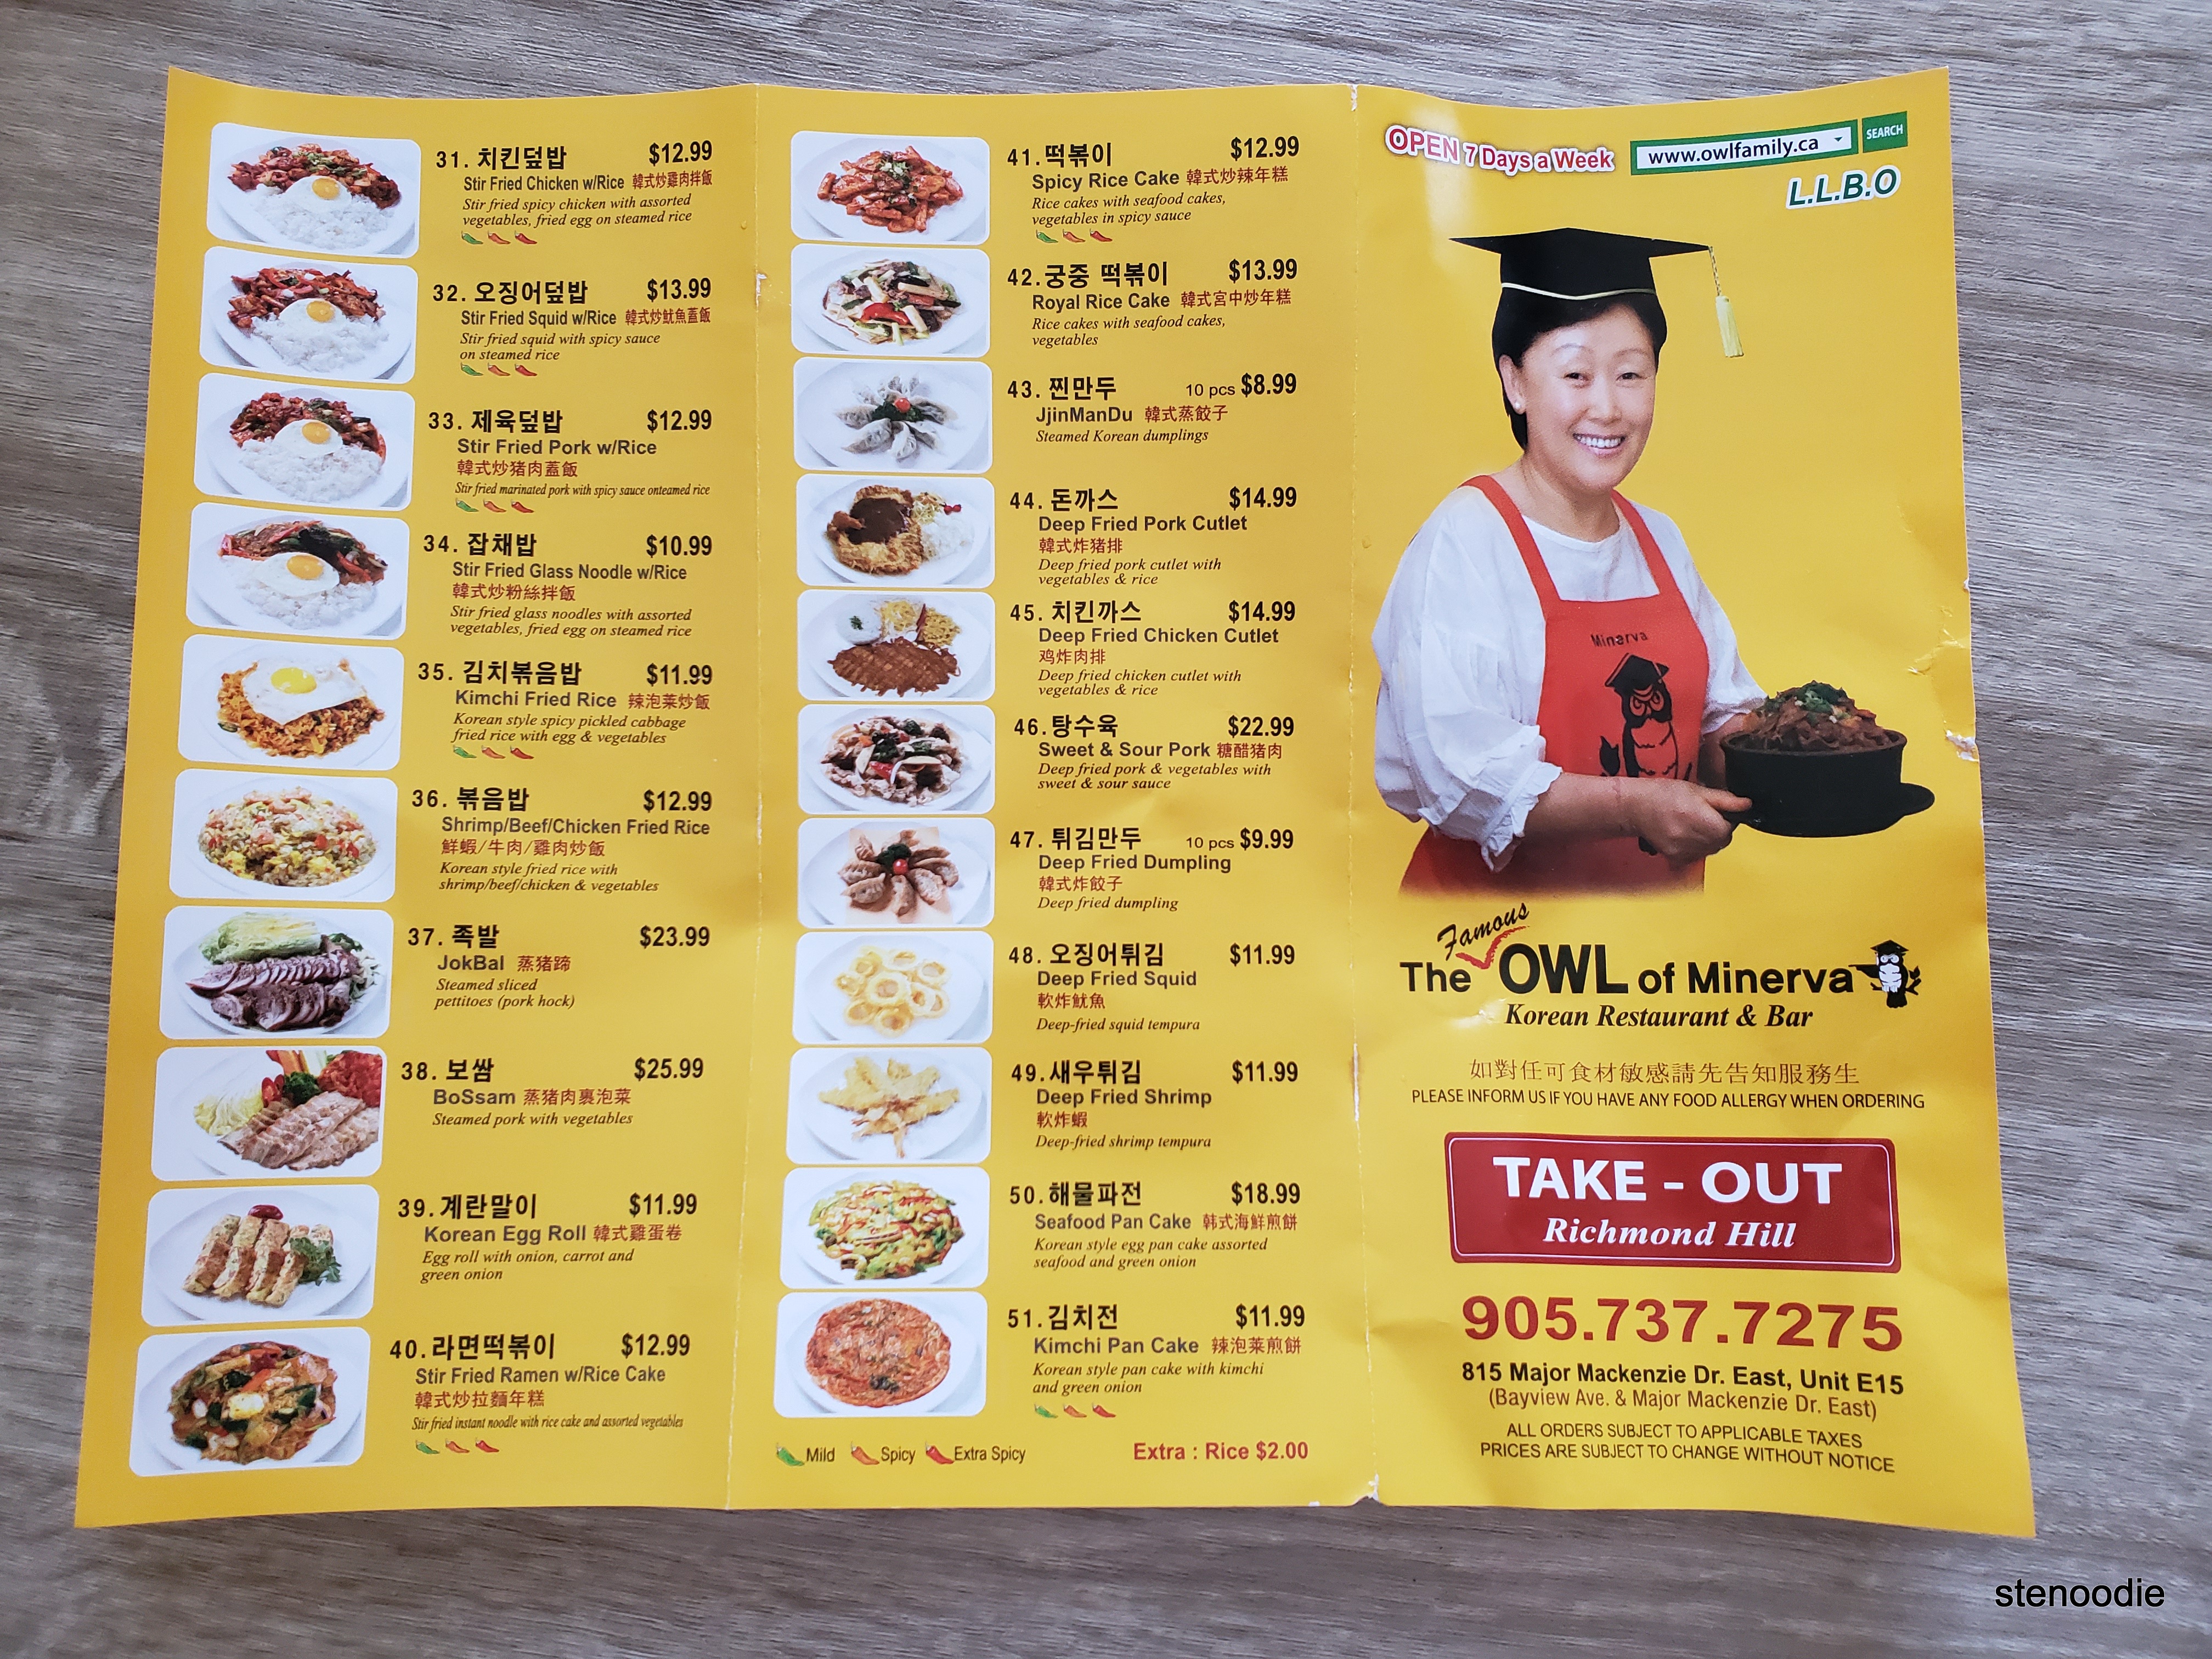 The Owl of Minerva takeout menu